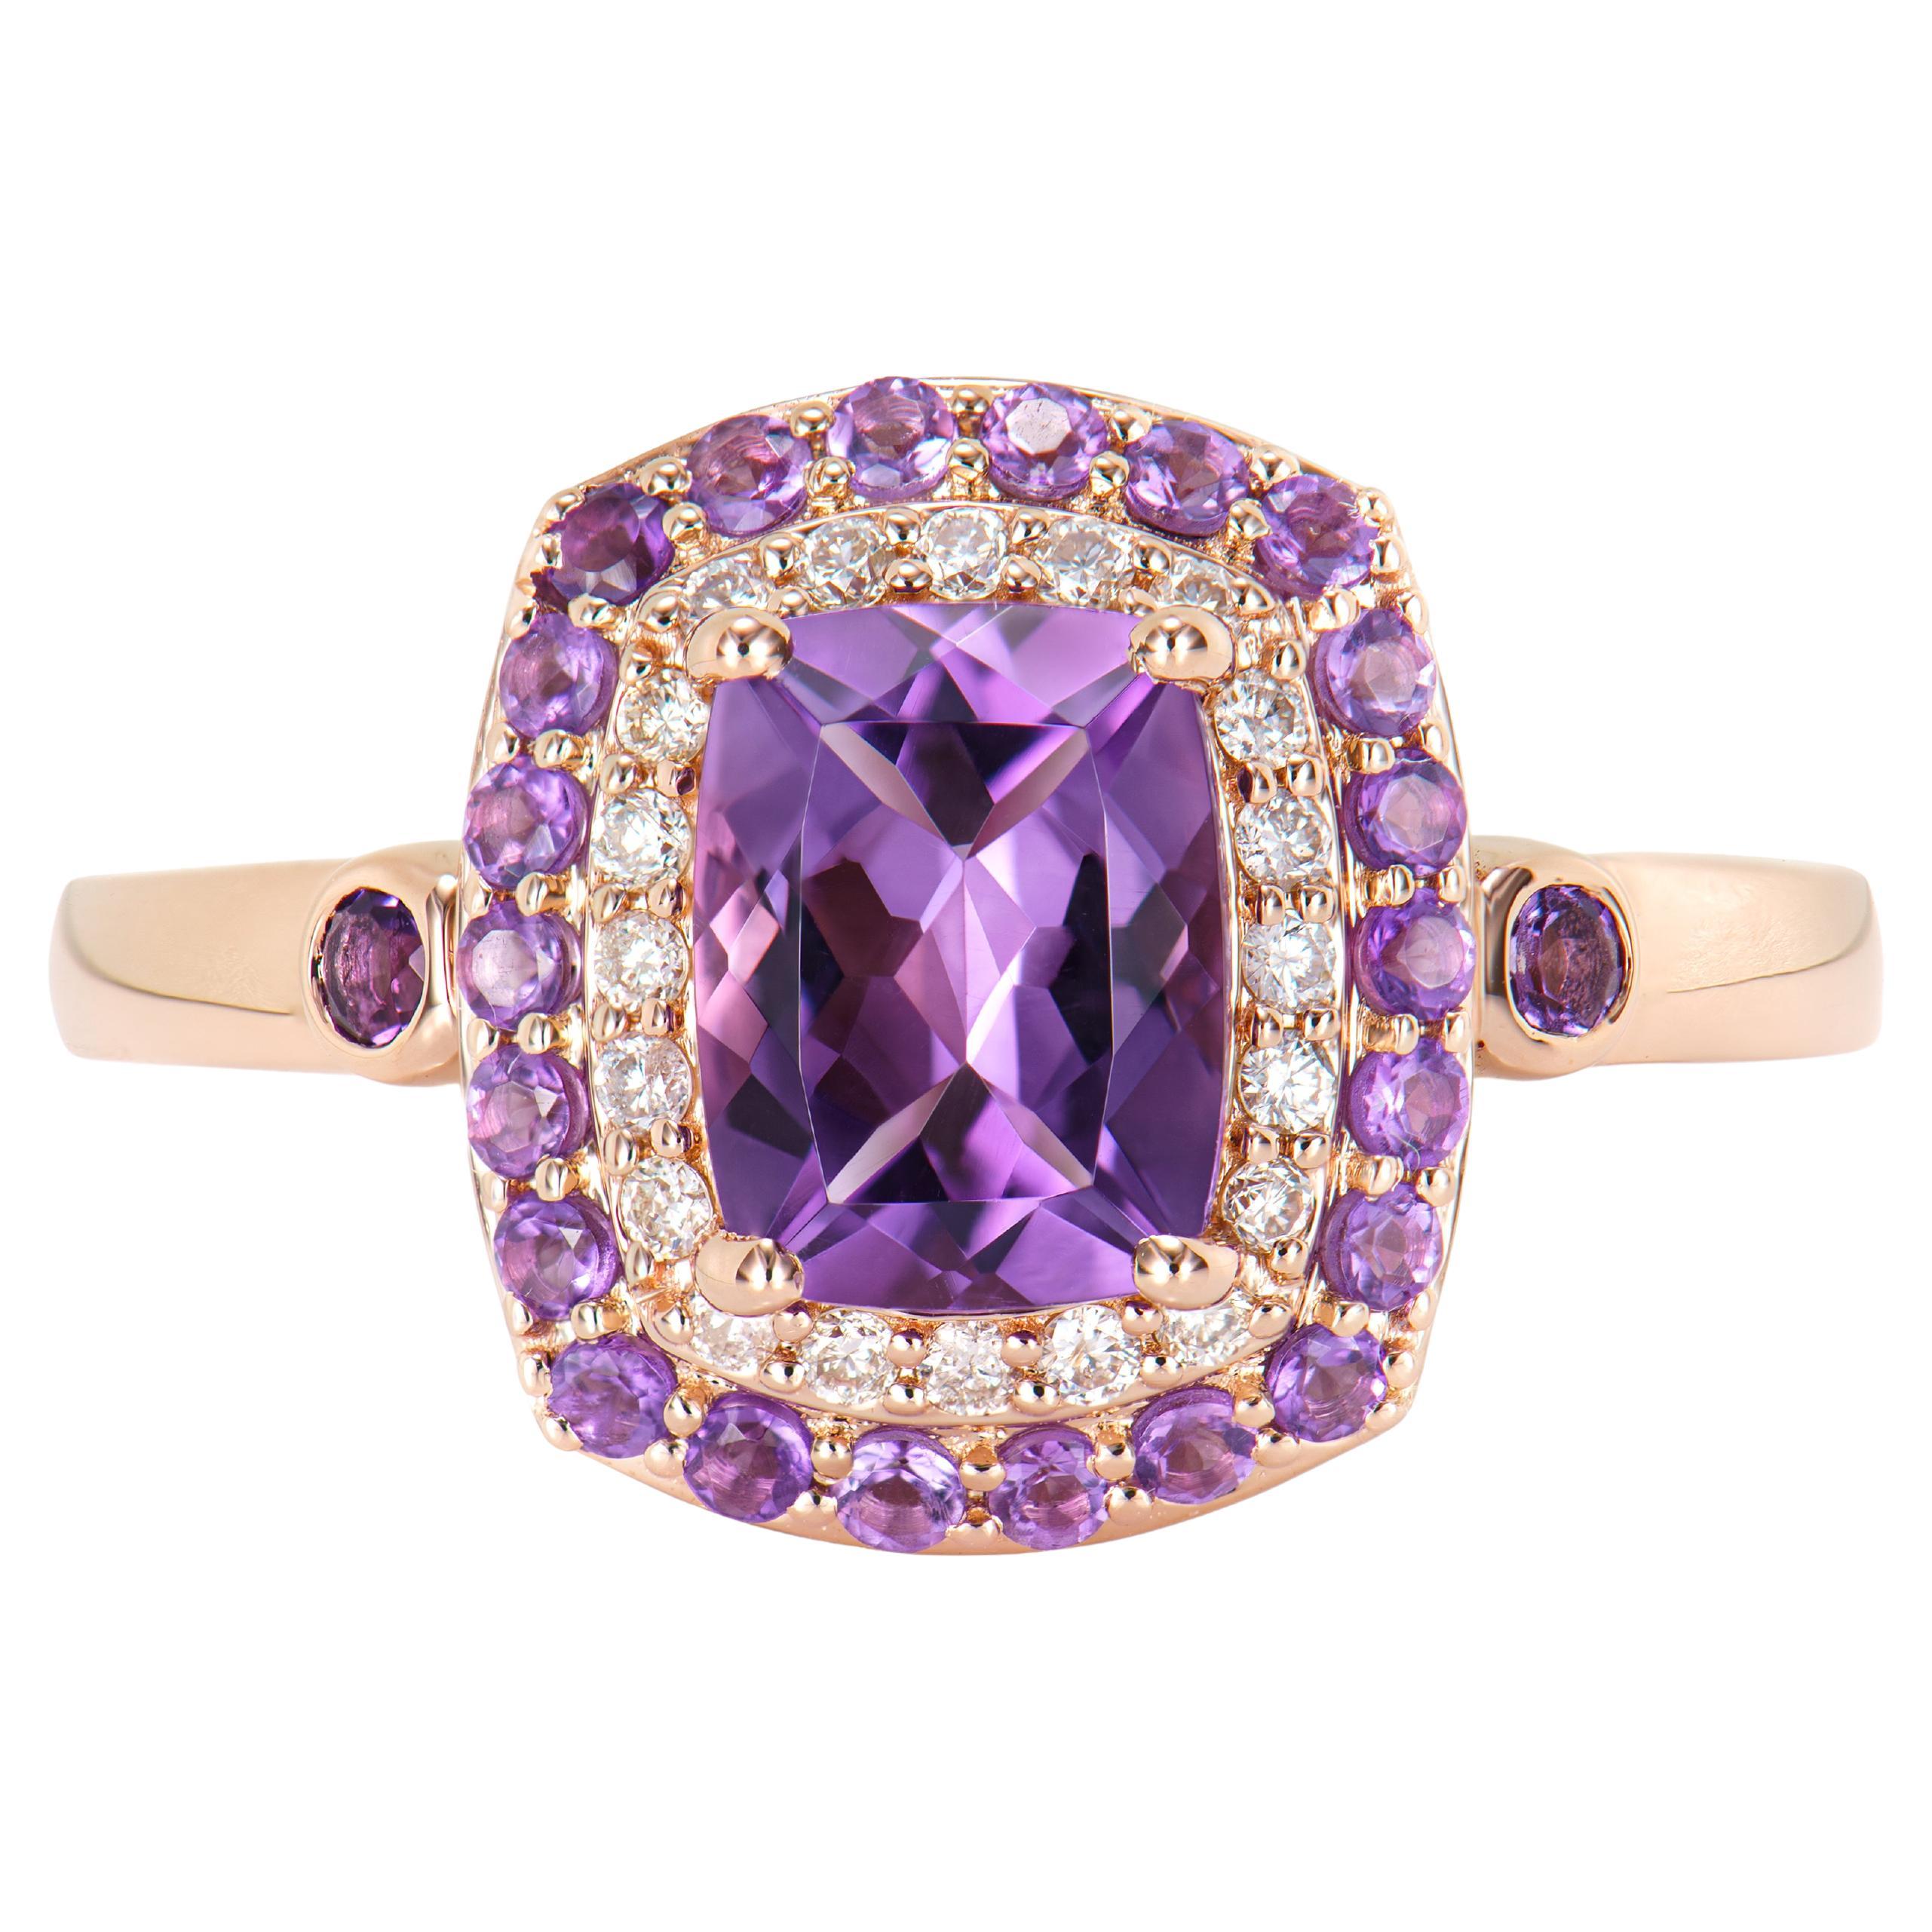 1.31 Carat Amethyst Fancy Ring in 14Karat Rose Gold with White Diamond.   For Sale